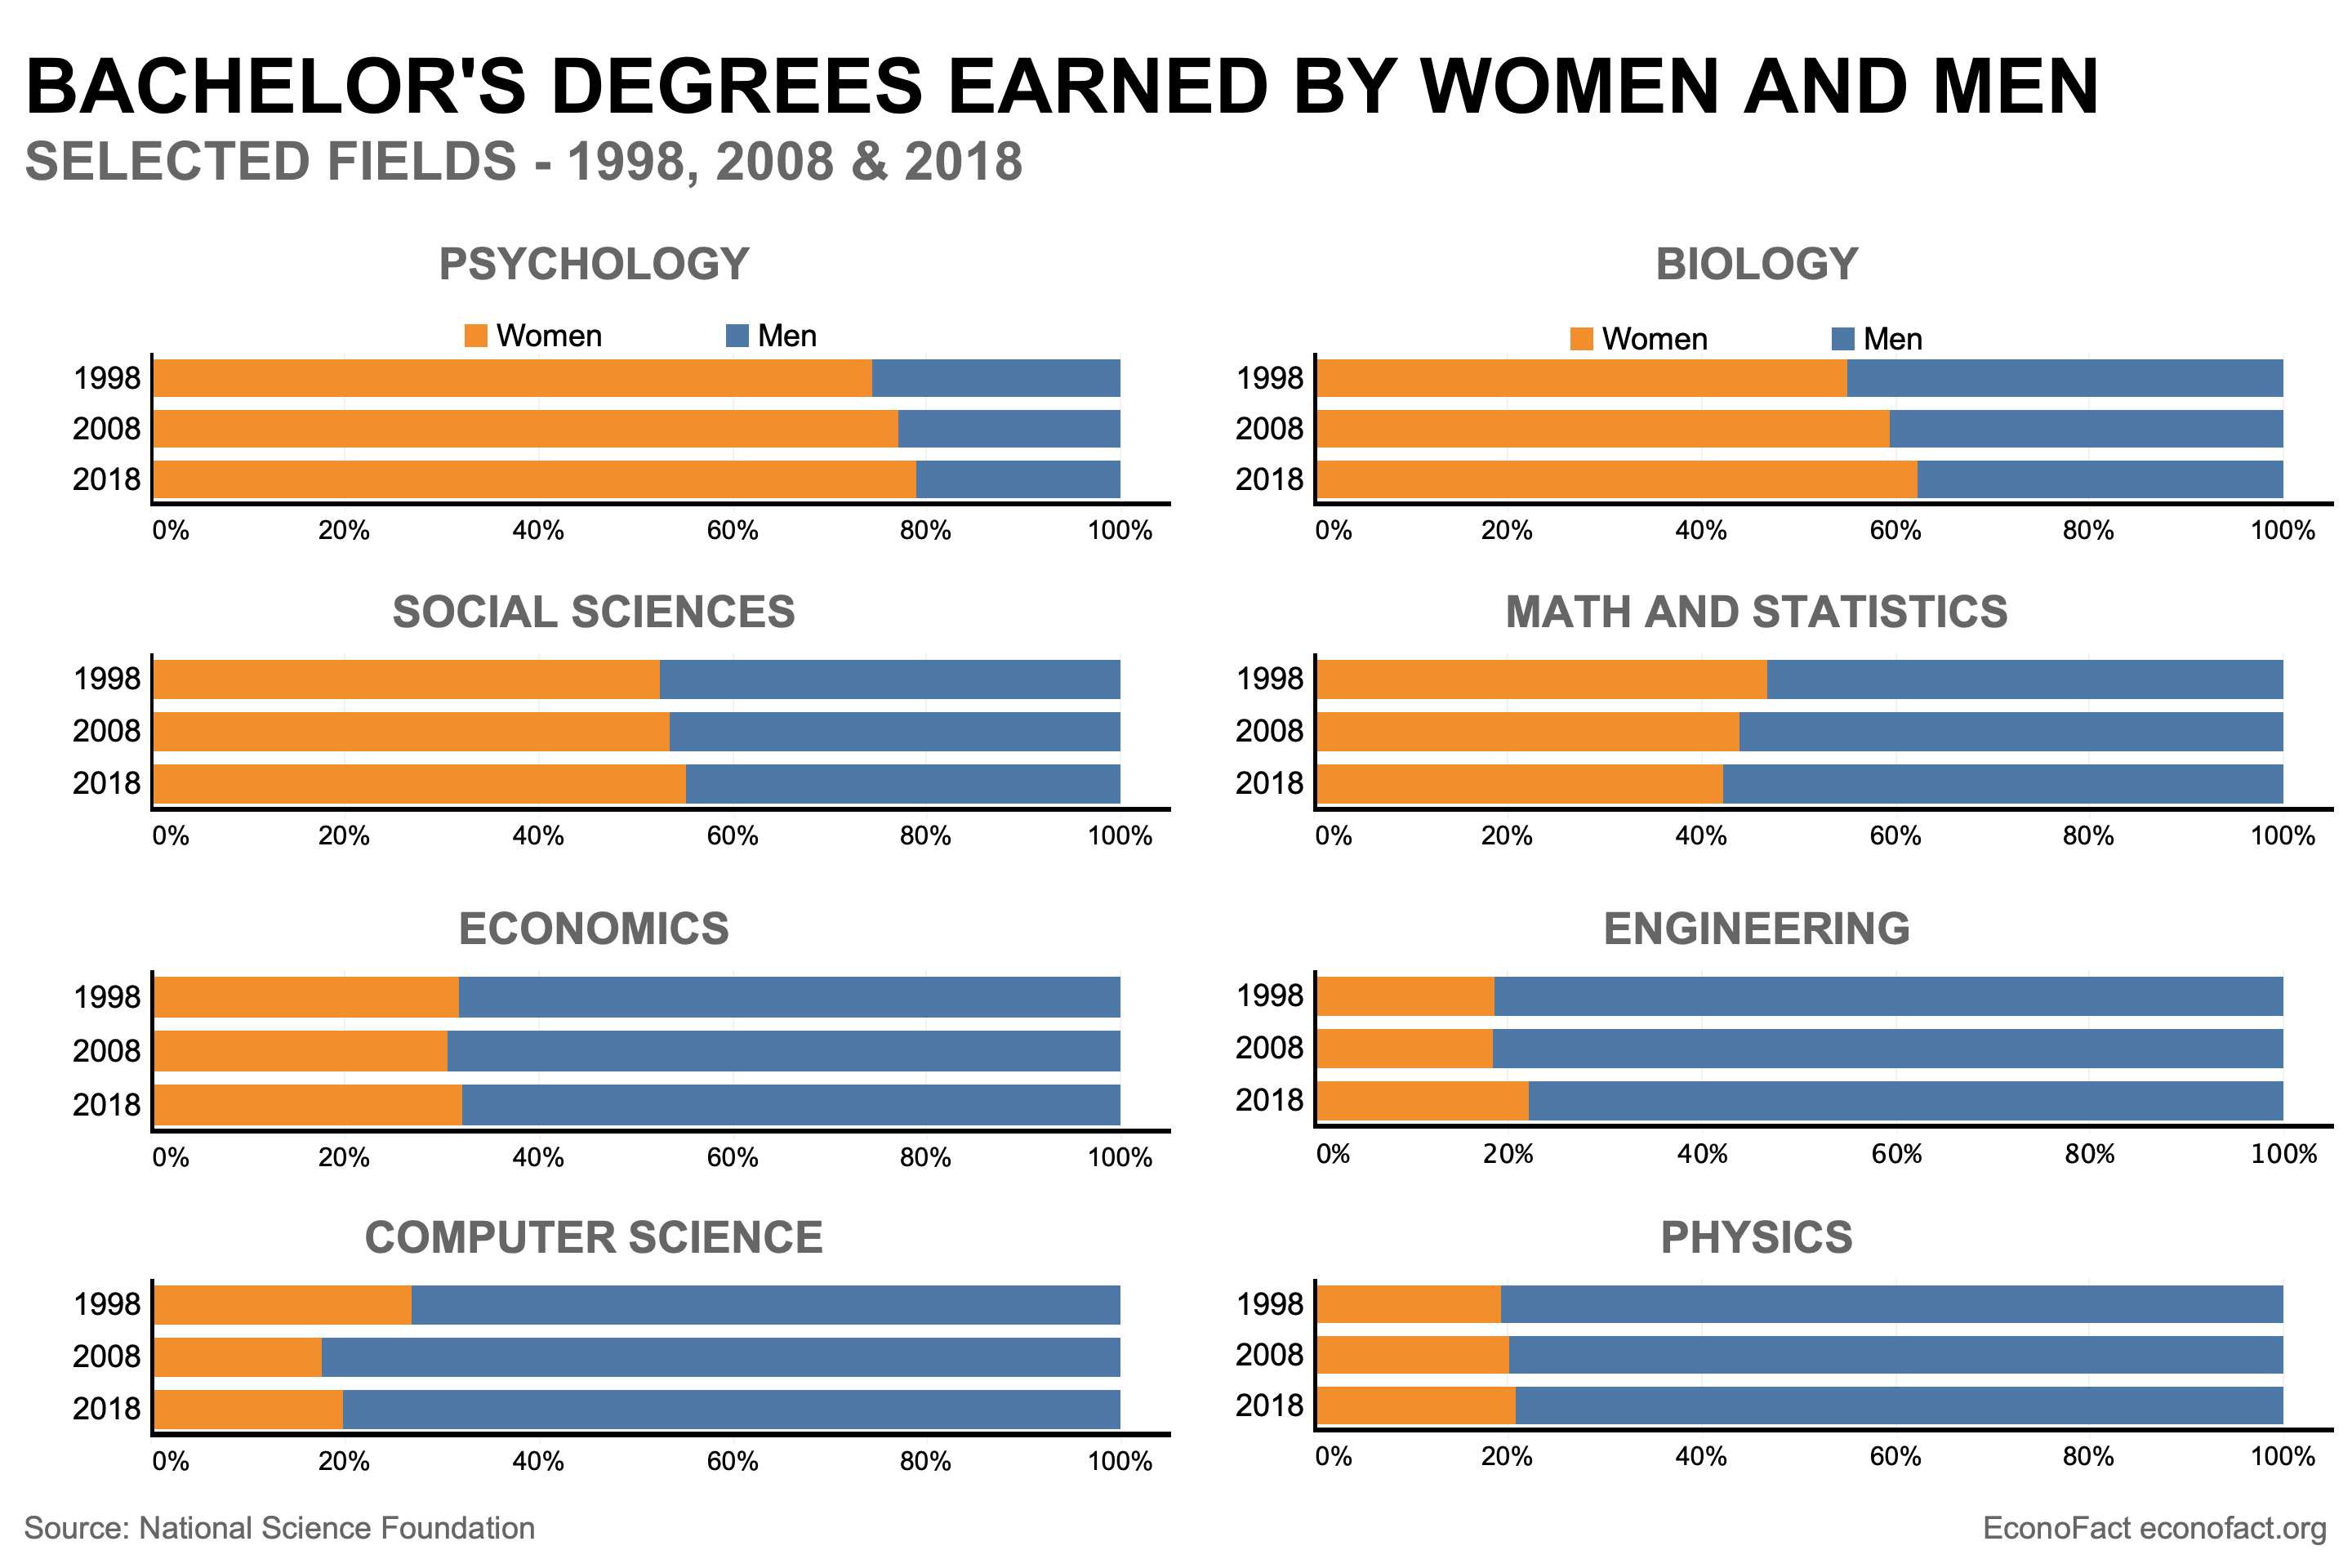 Are Women Reaching Parity with Men in STEM?